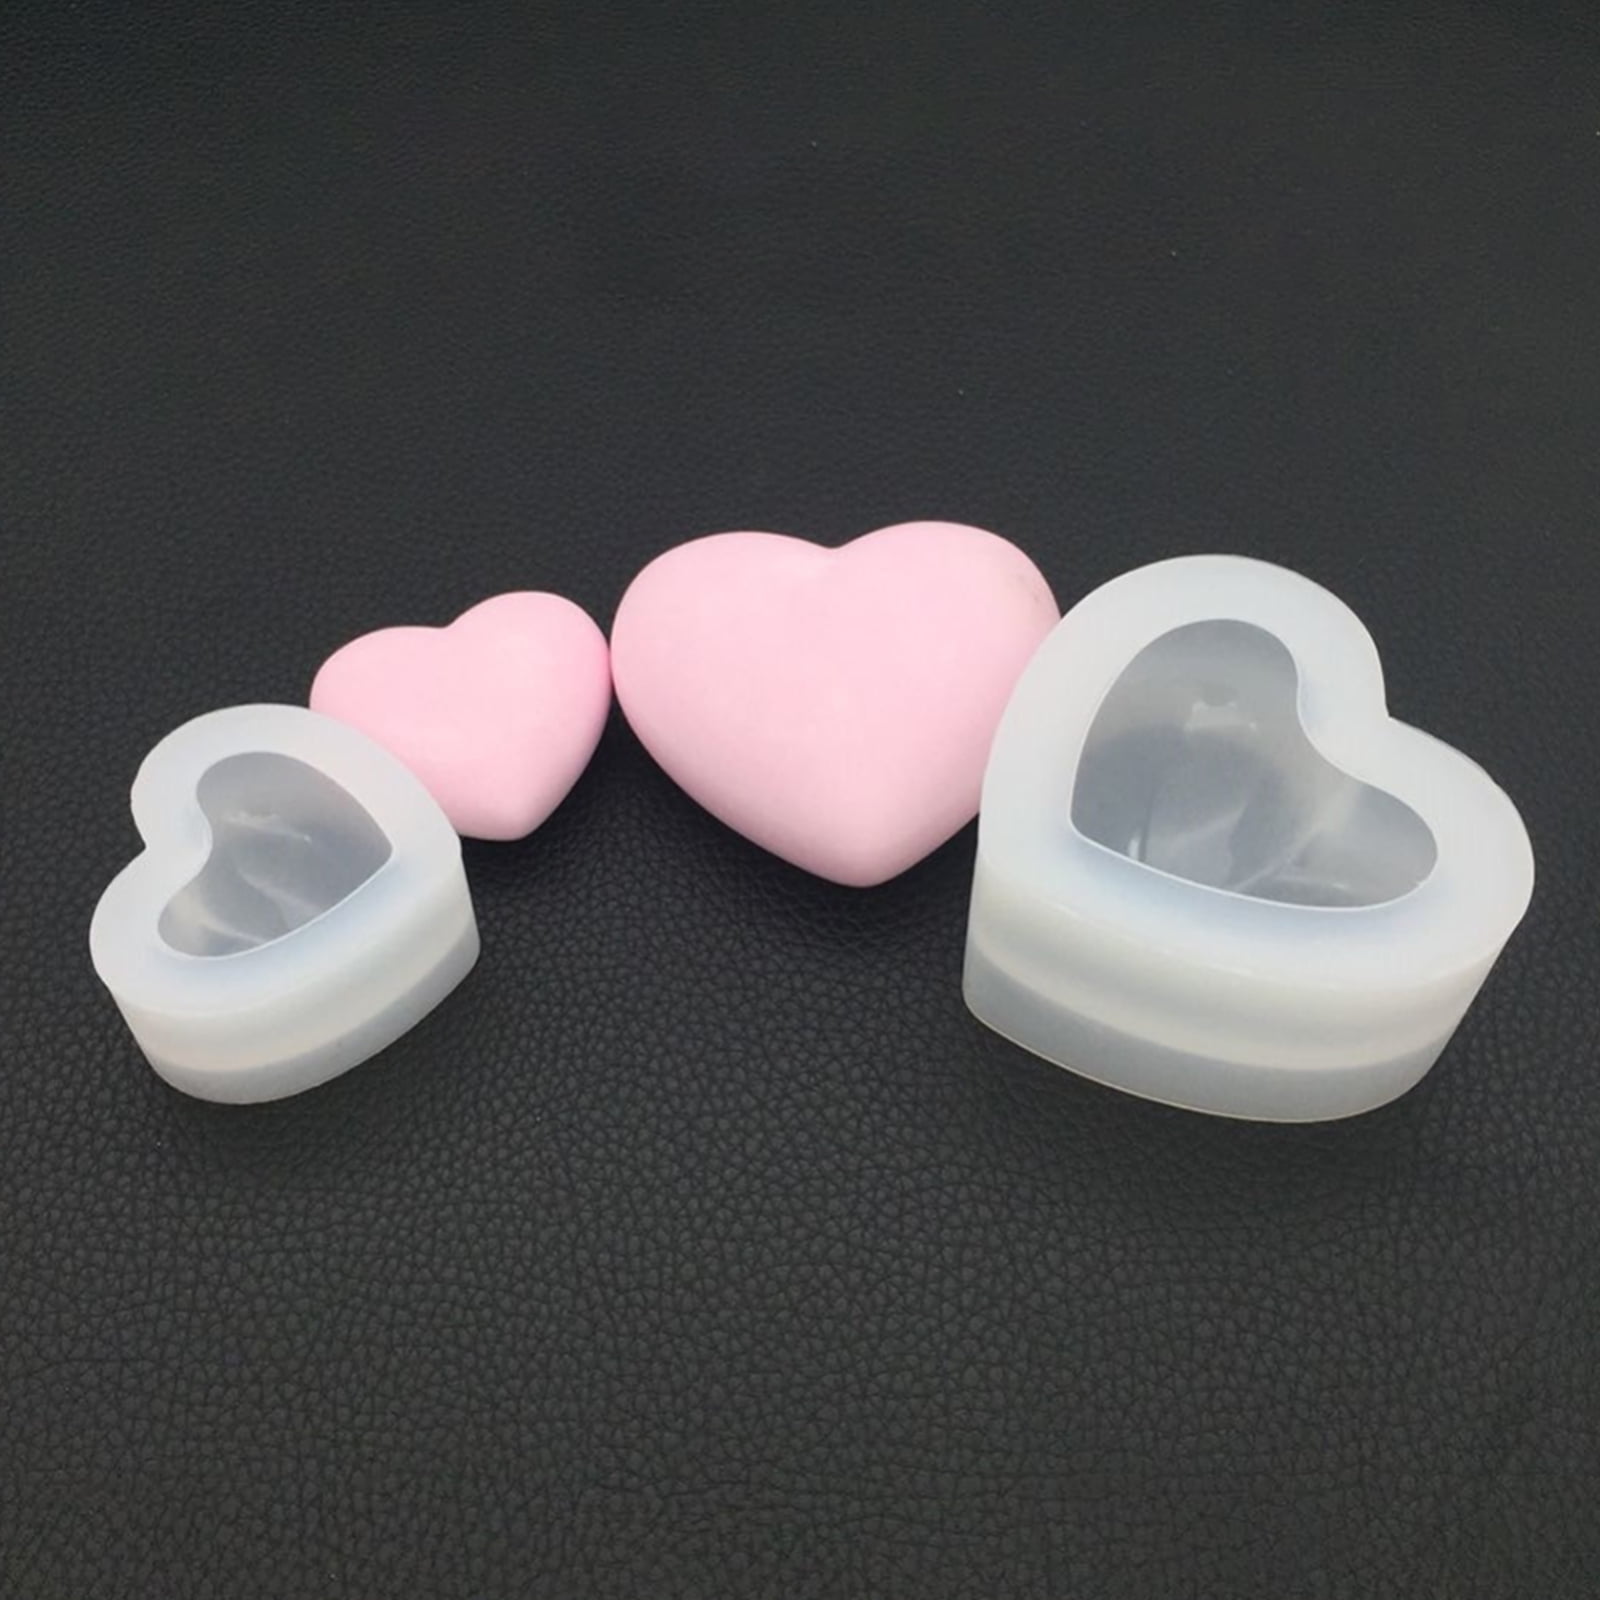 2x Clear Heart Silicone Mold Mould for Resin Jewelry Making Chocolate Baking 